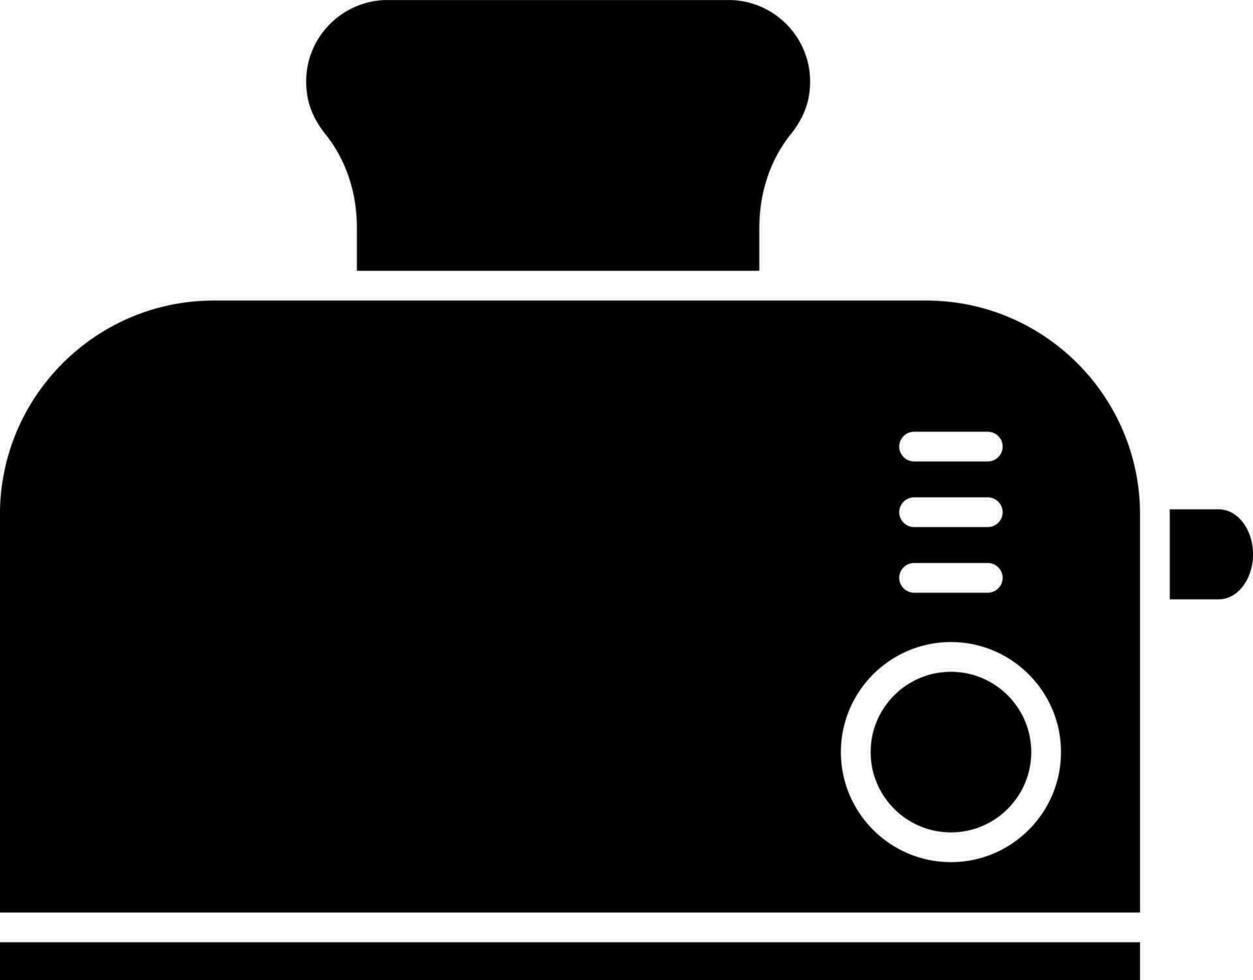 Flat style toaster icon or symbol. vector